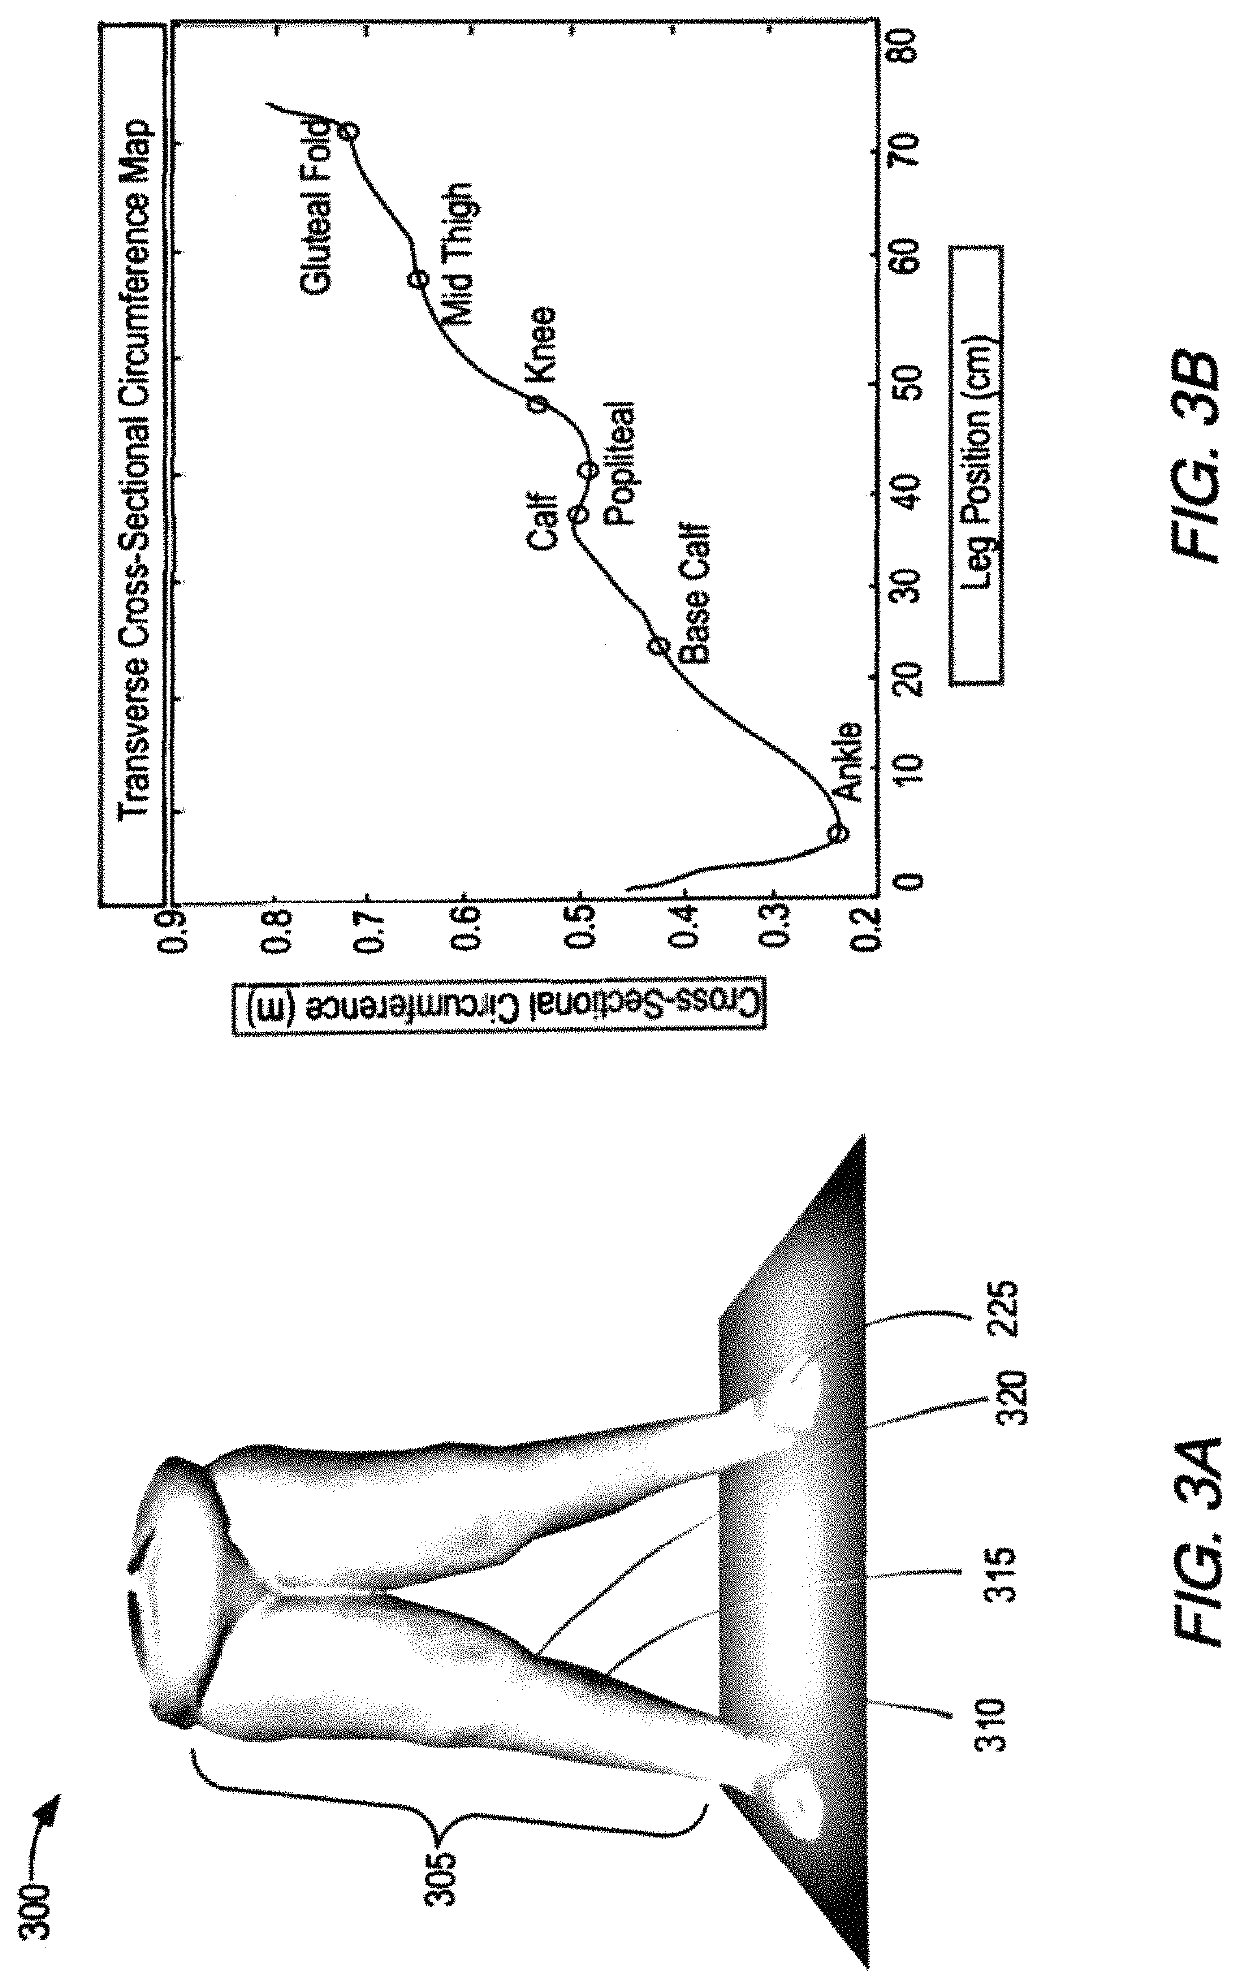 Methods and systems for identifying body part or body area anatomical landmarks from digital imagery for the fitting of compression garments for a person in need thereof